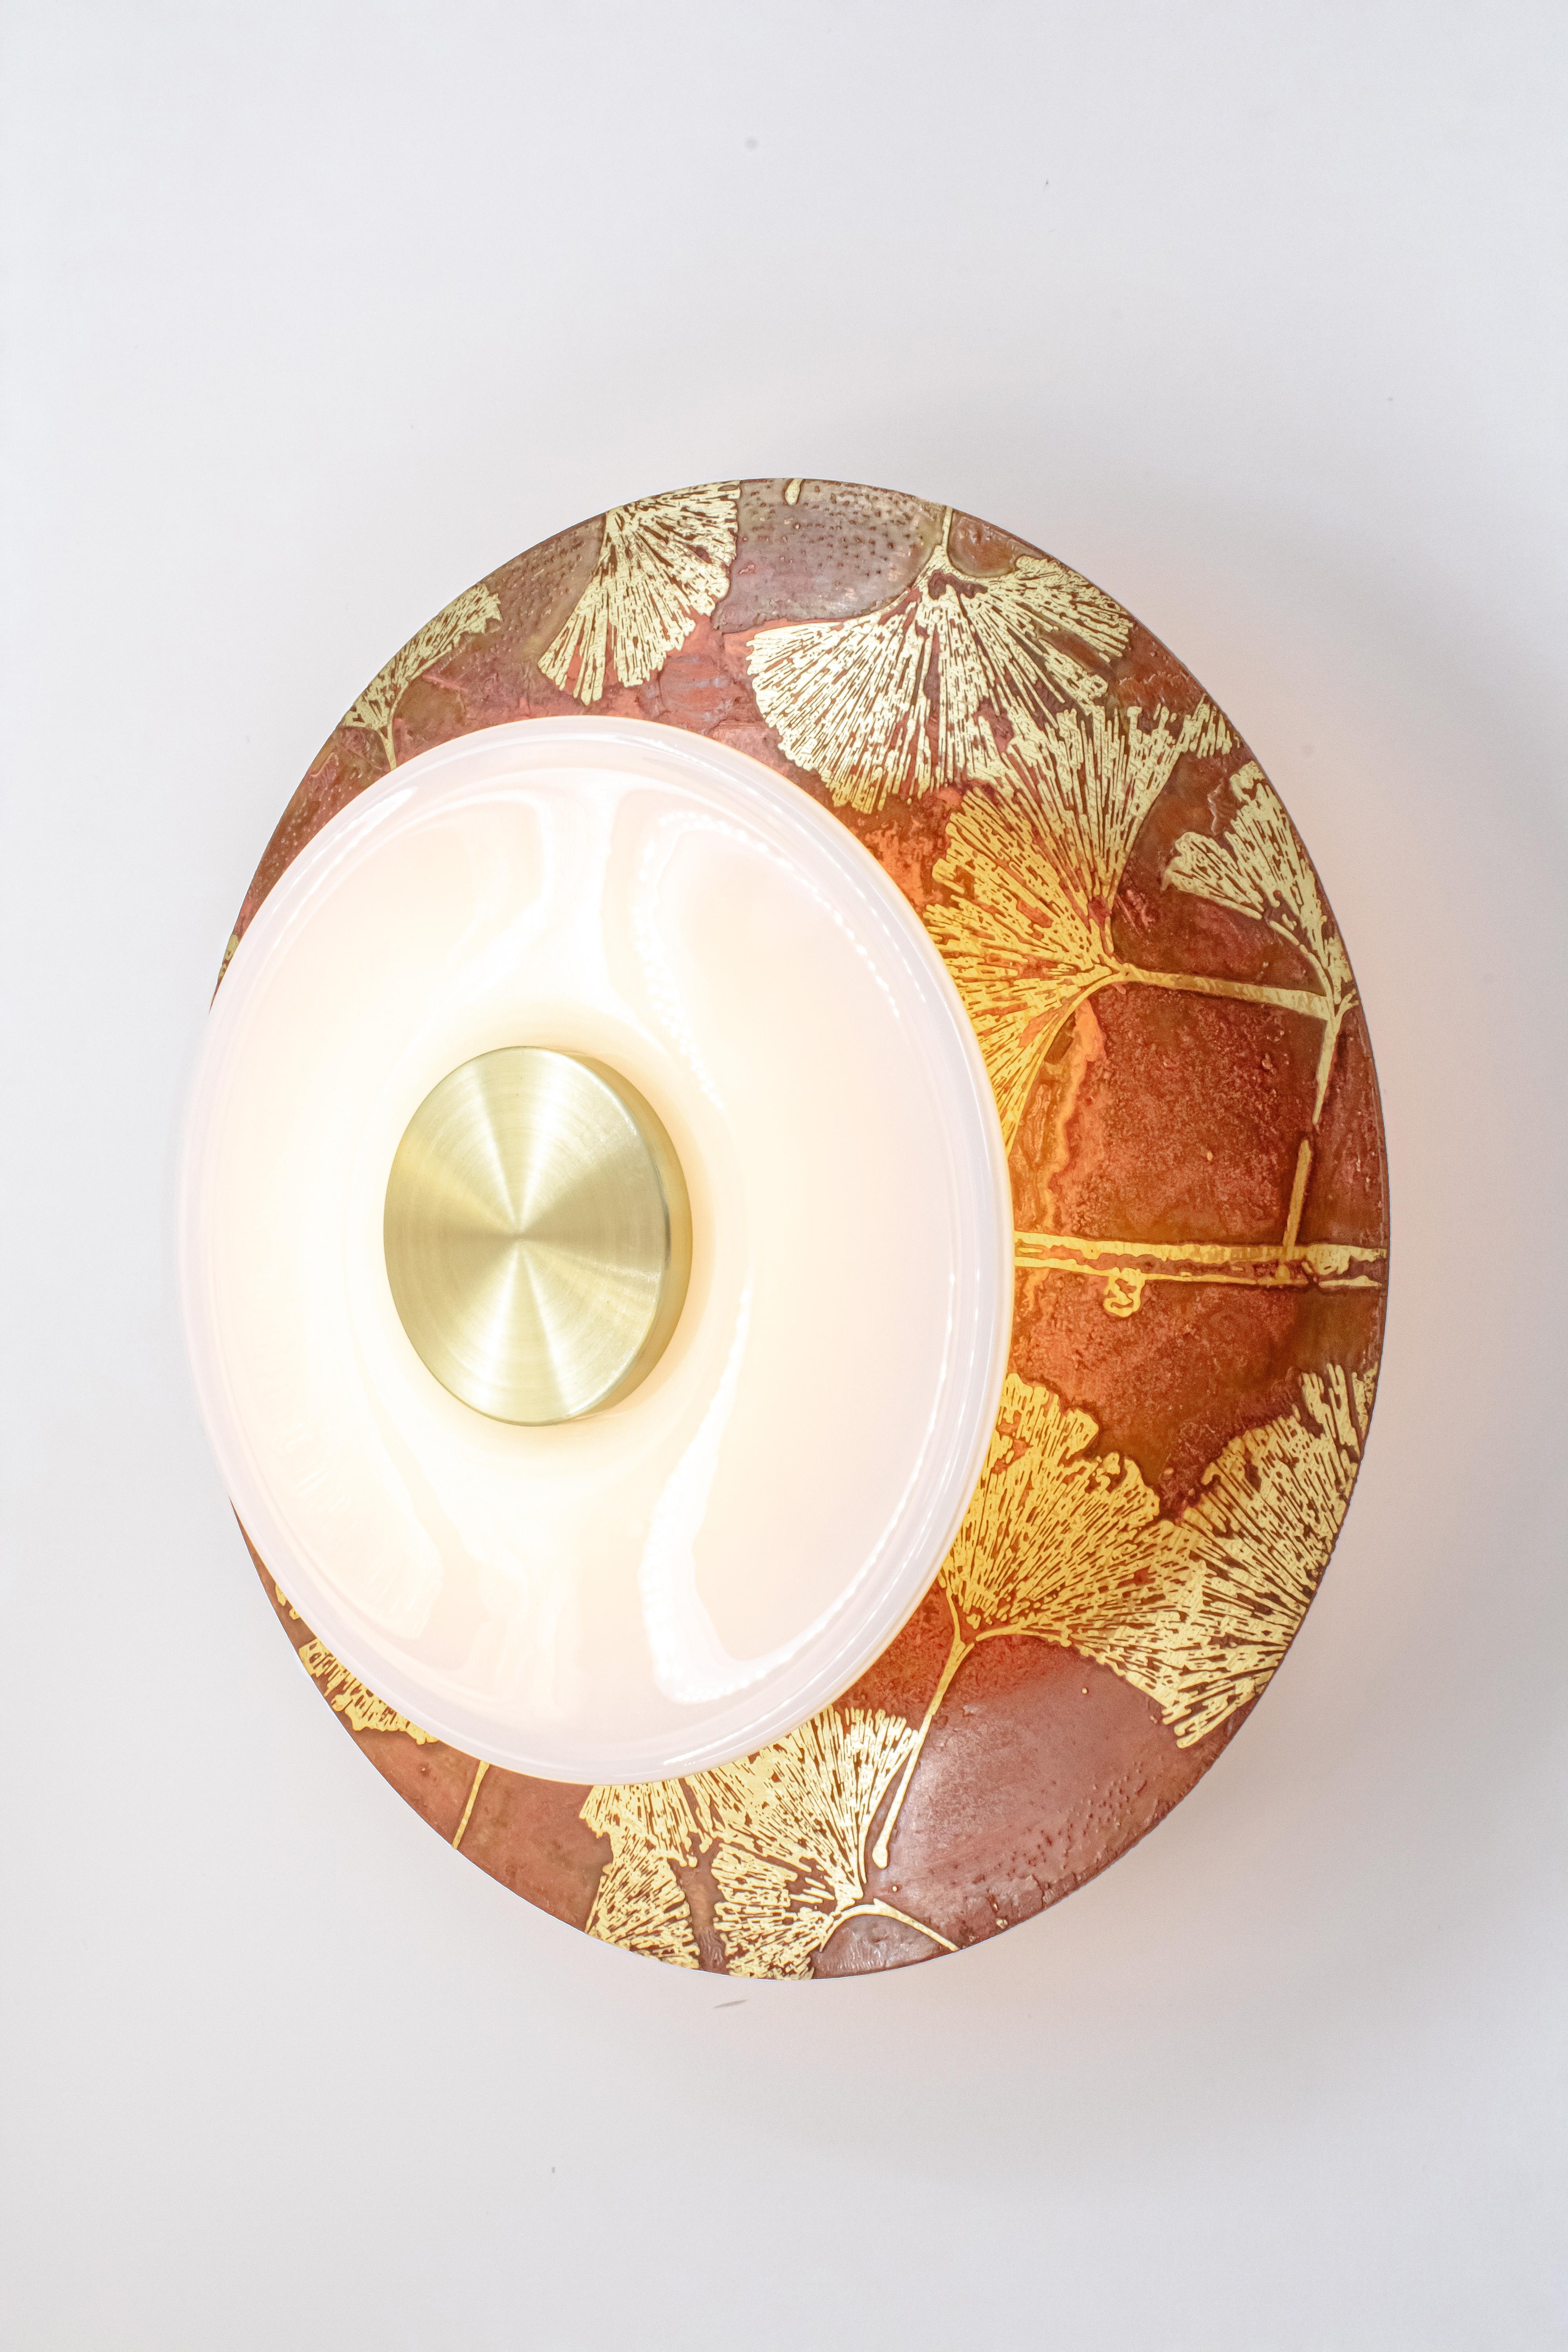 Our wall mounted Klein Sconce offers an atmospheric glow softened by a hand blown glass rondelle in the front while still giving off ample back lighting. With multiple brass textures and finishes available, the Klein Sconce can be customized in a